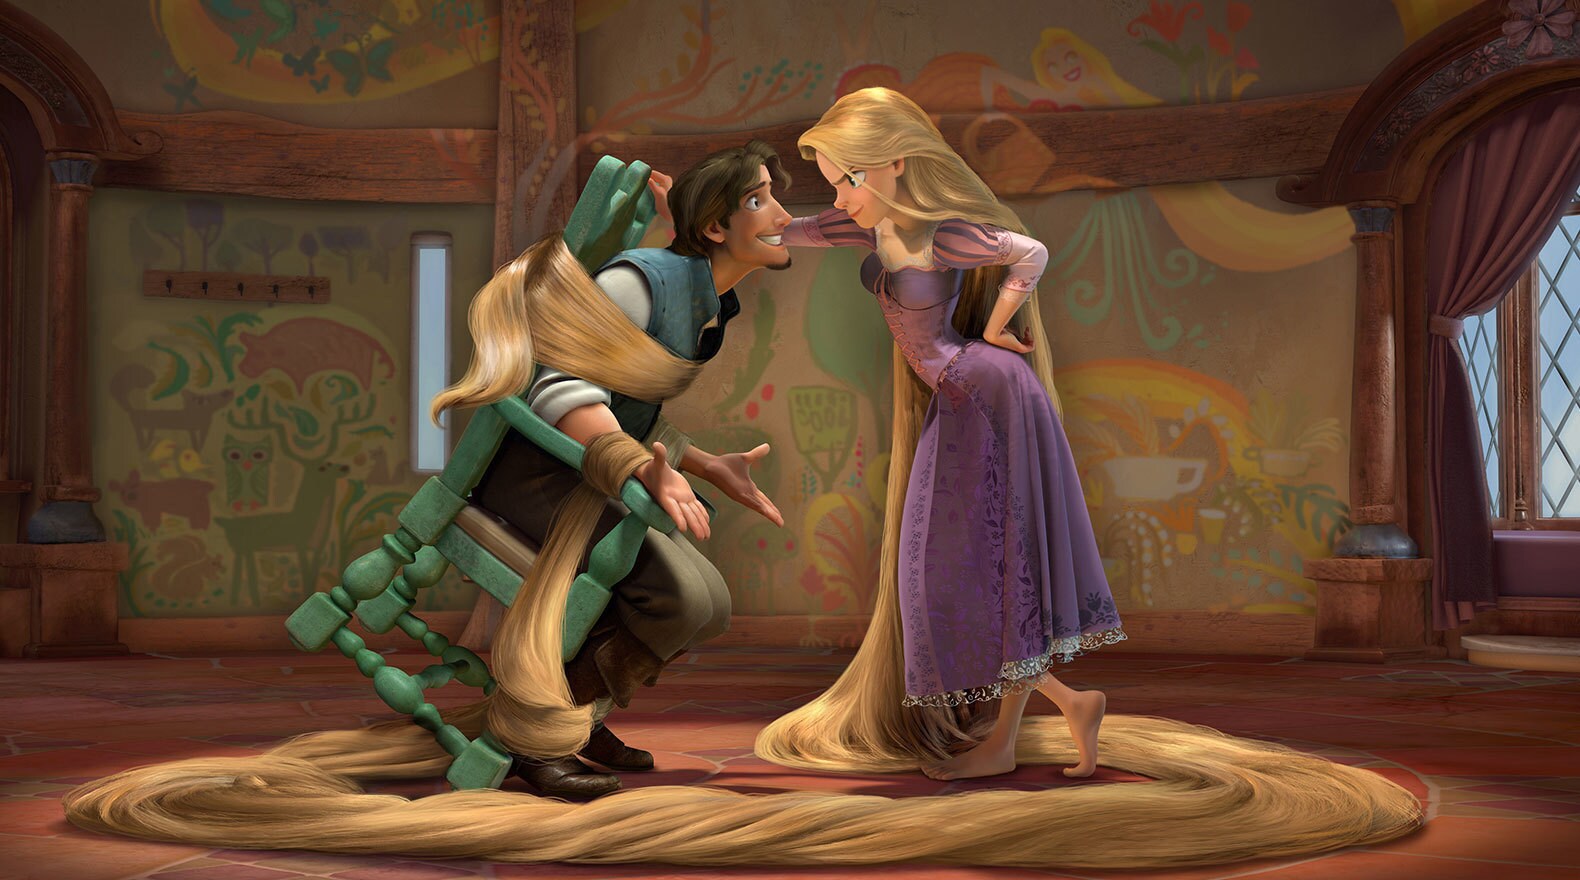 Flynn Rider voiced by Zachary Levi tied to a chair by Rapunzel's hair